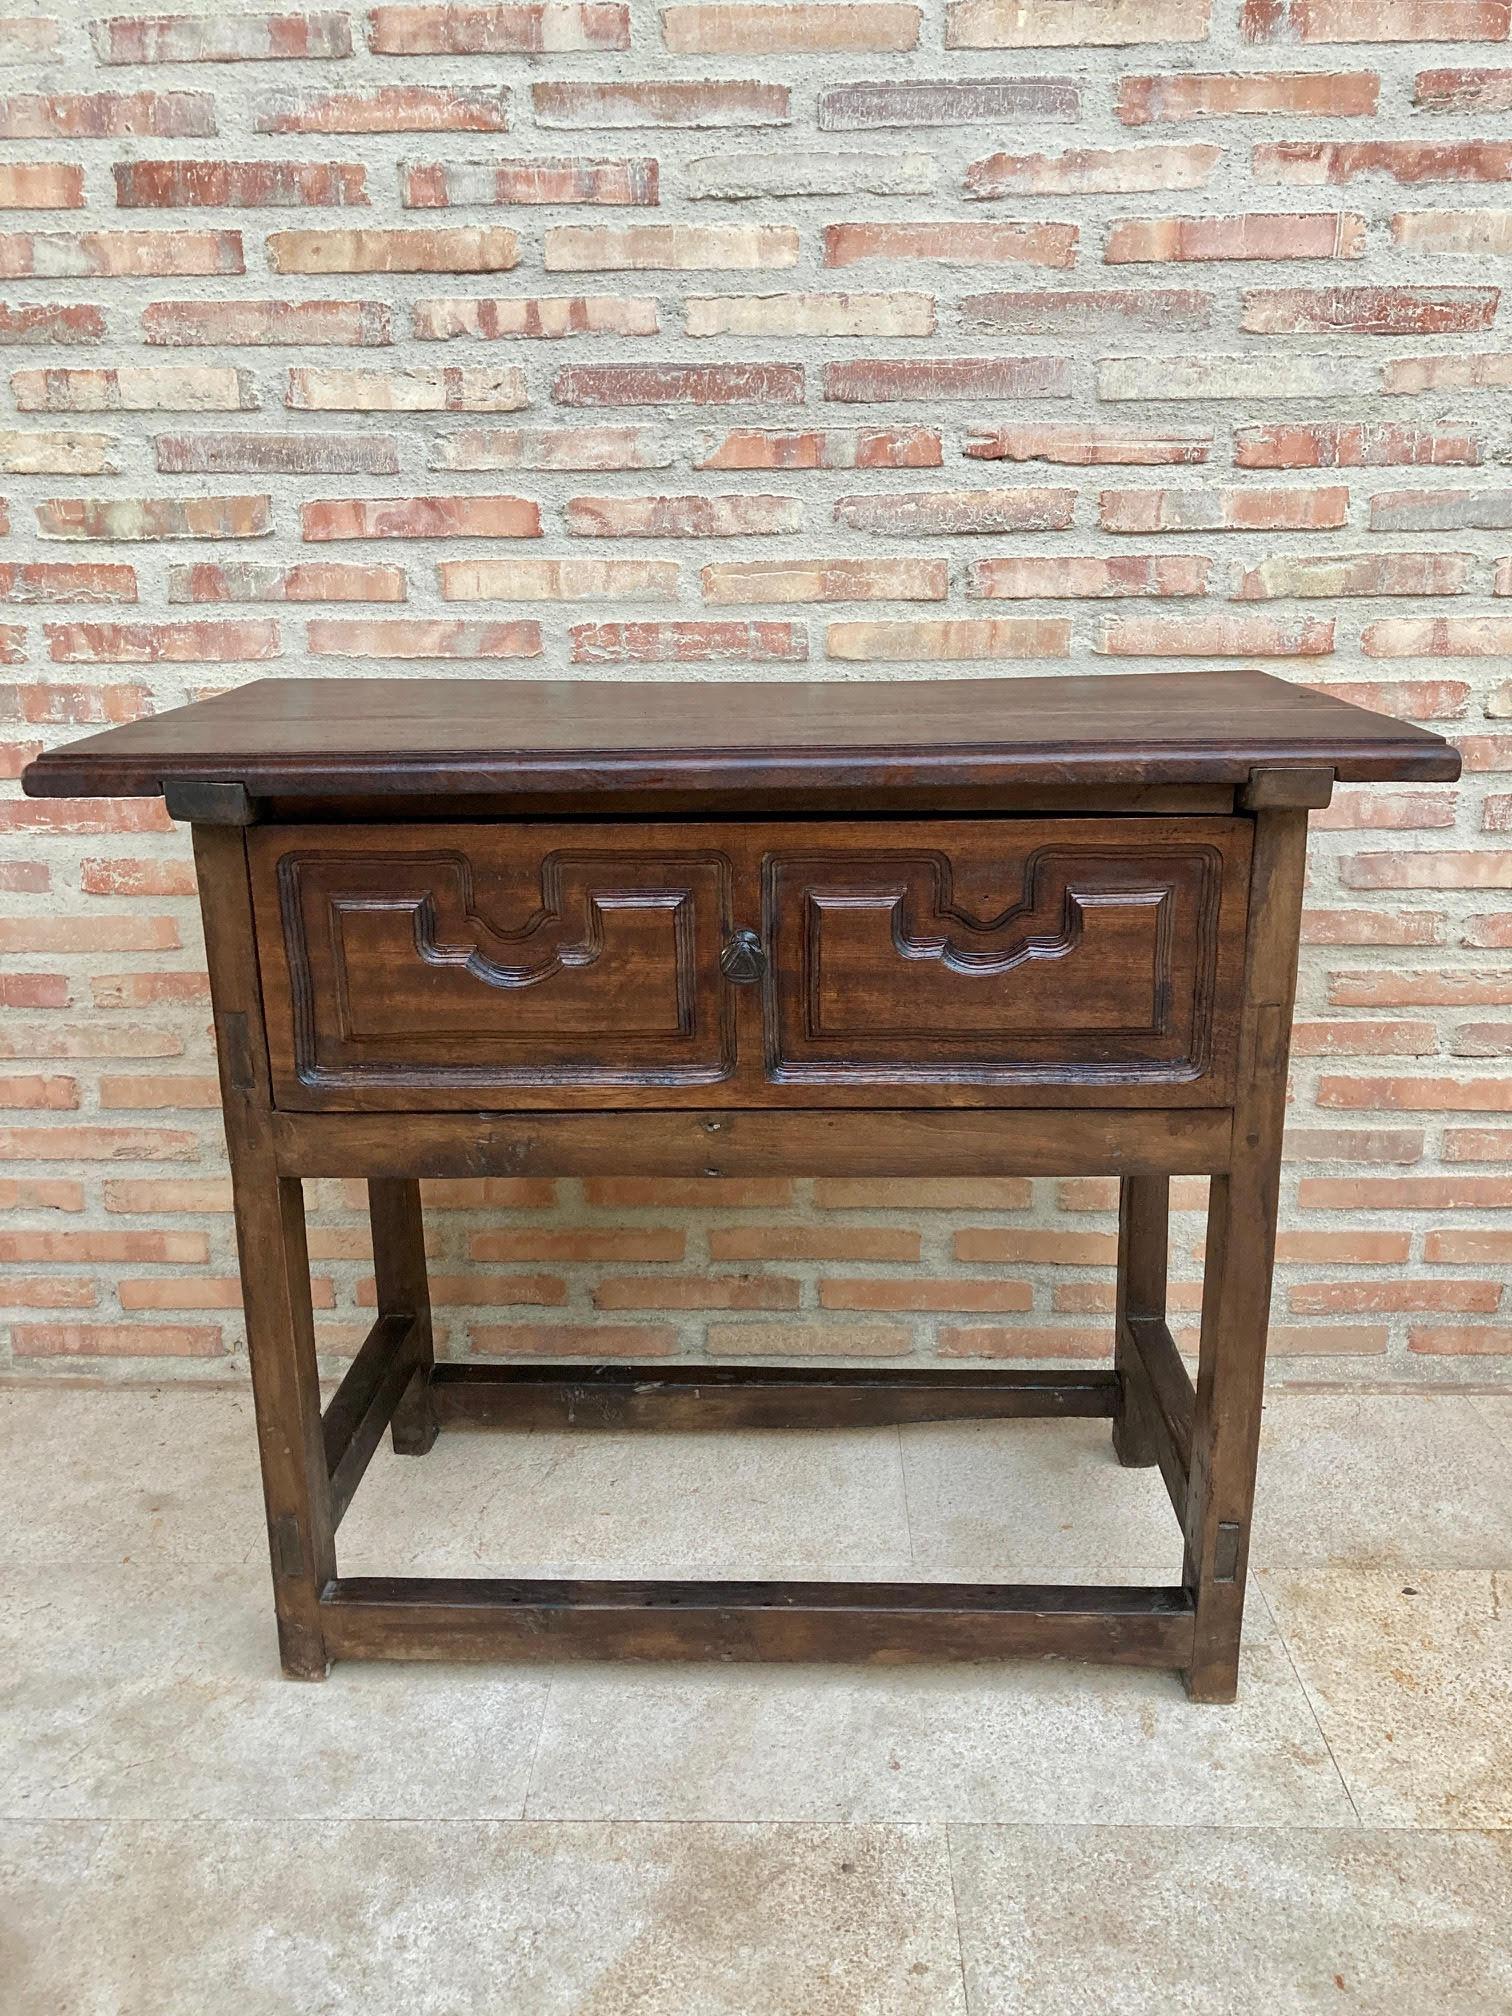 Early 20th century Spanish walnut work side table with large single drawer. 
A Spanish walnut side table with a wide drawer, carved front, and straight legs attached to straight counter beams from the early 20th century. 
This elegant Spanish